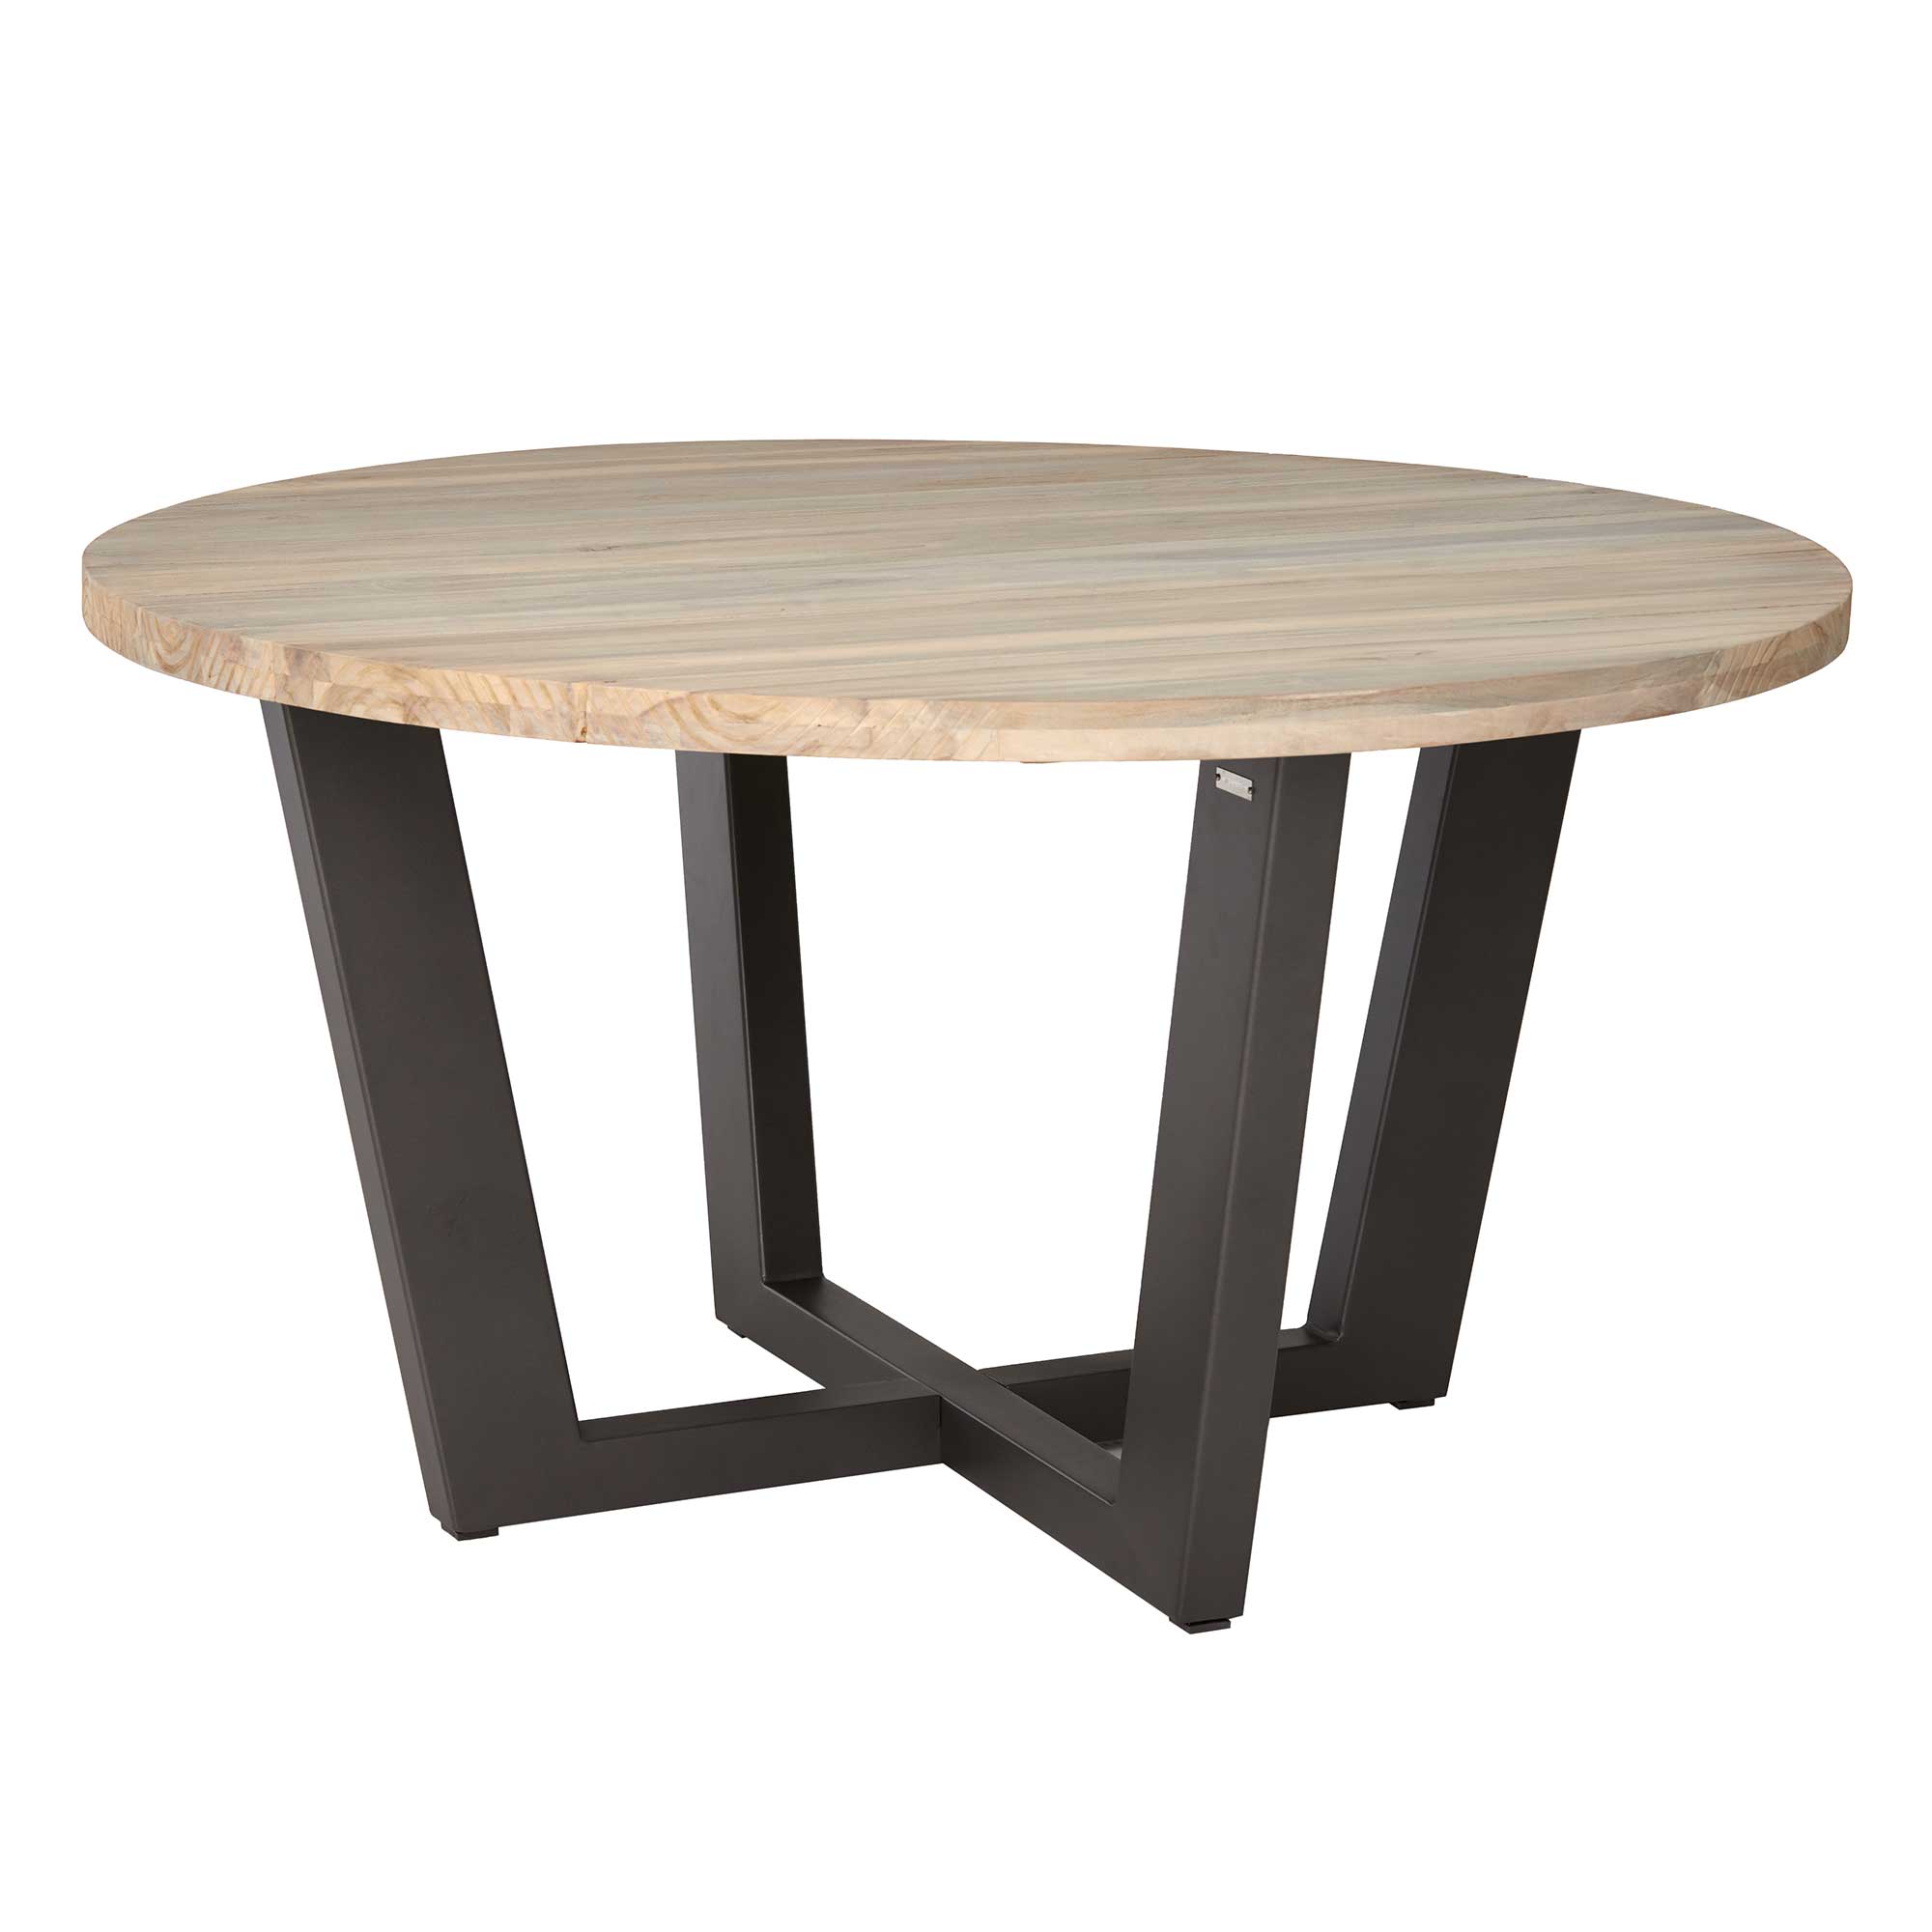 Ivy Dining Table Round 140cm, Round, Neutral | Barker & Stonehouse